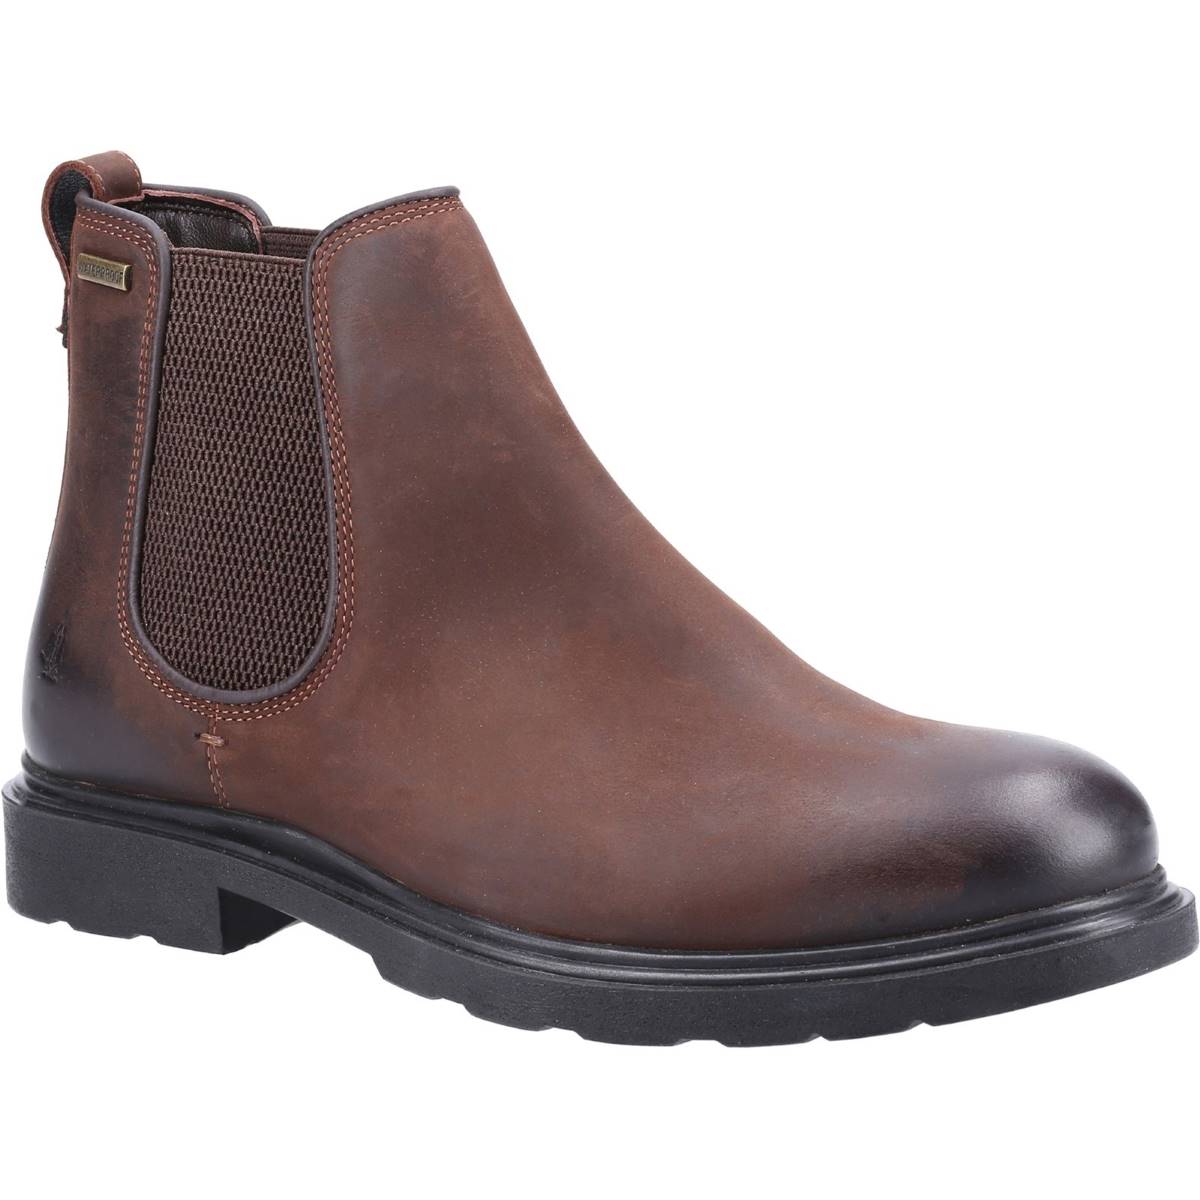 Hush Puppies Preston Chelsea Brown Mens boots HPM2000-232-1 in a Plain Leather in Size 6